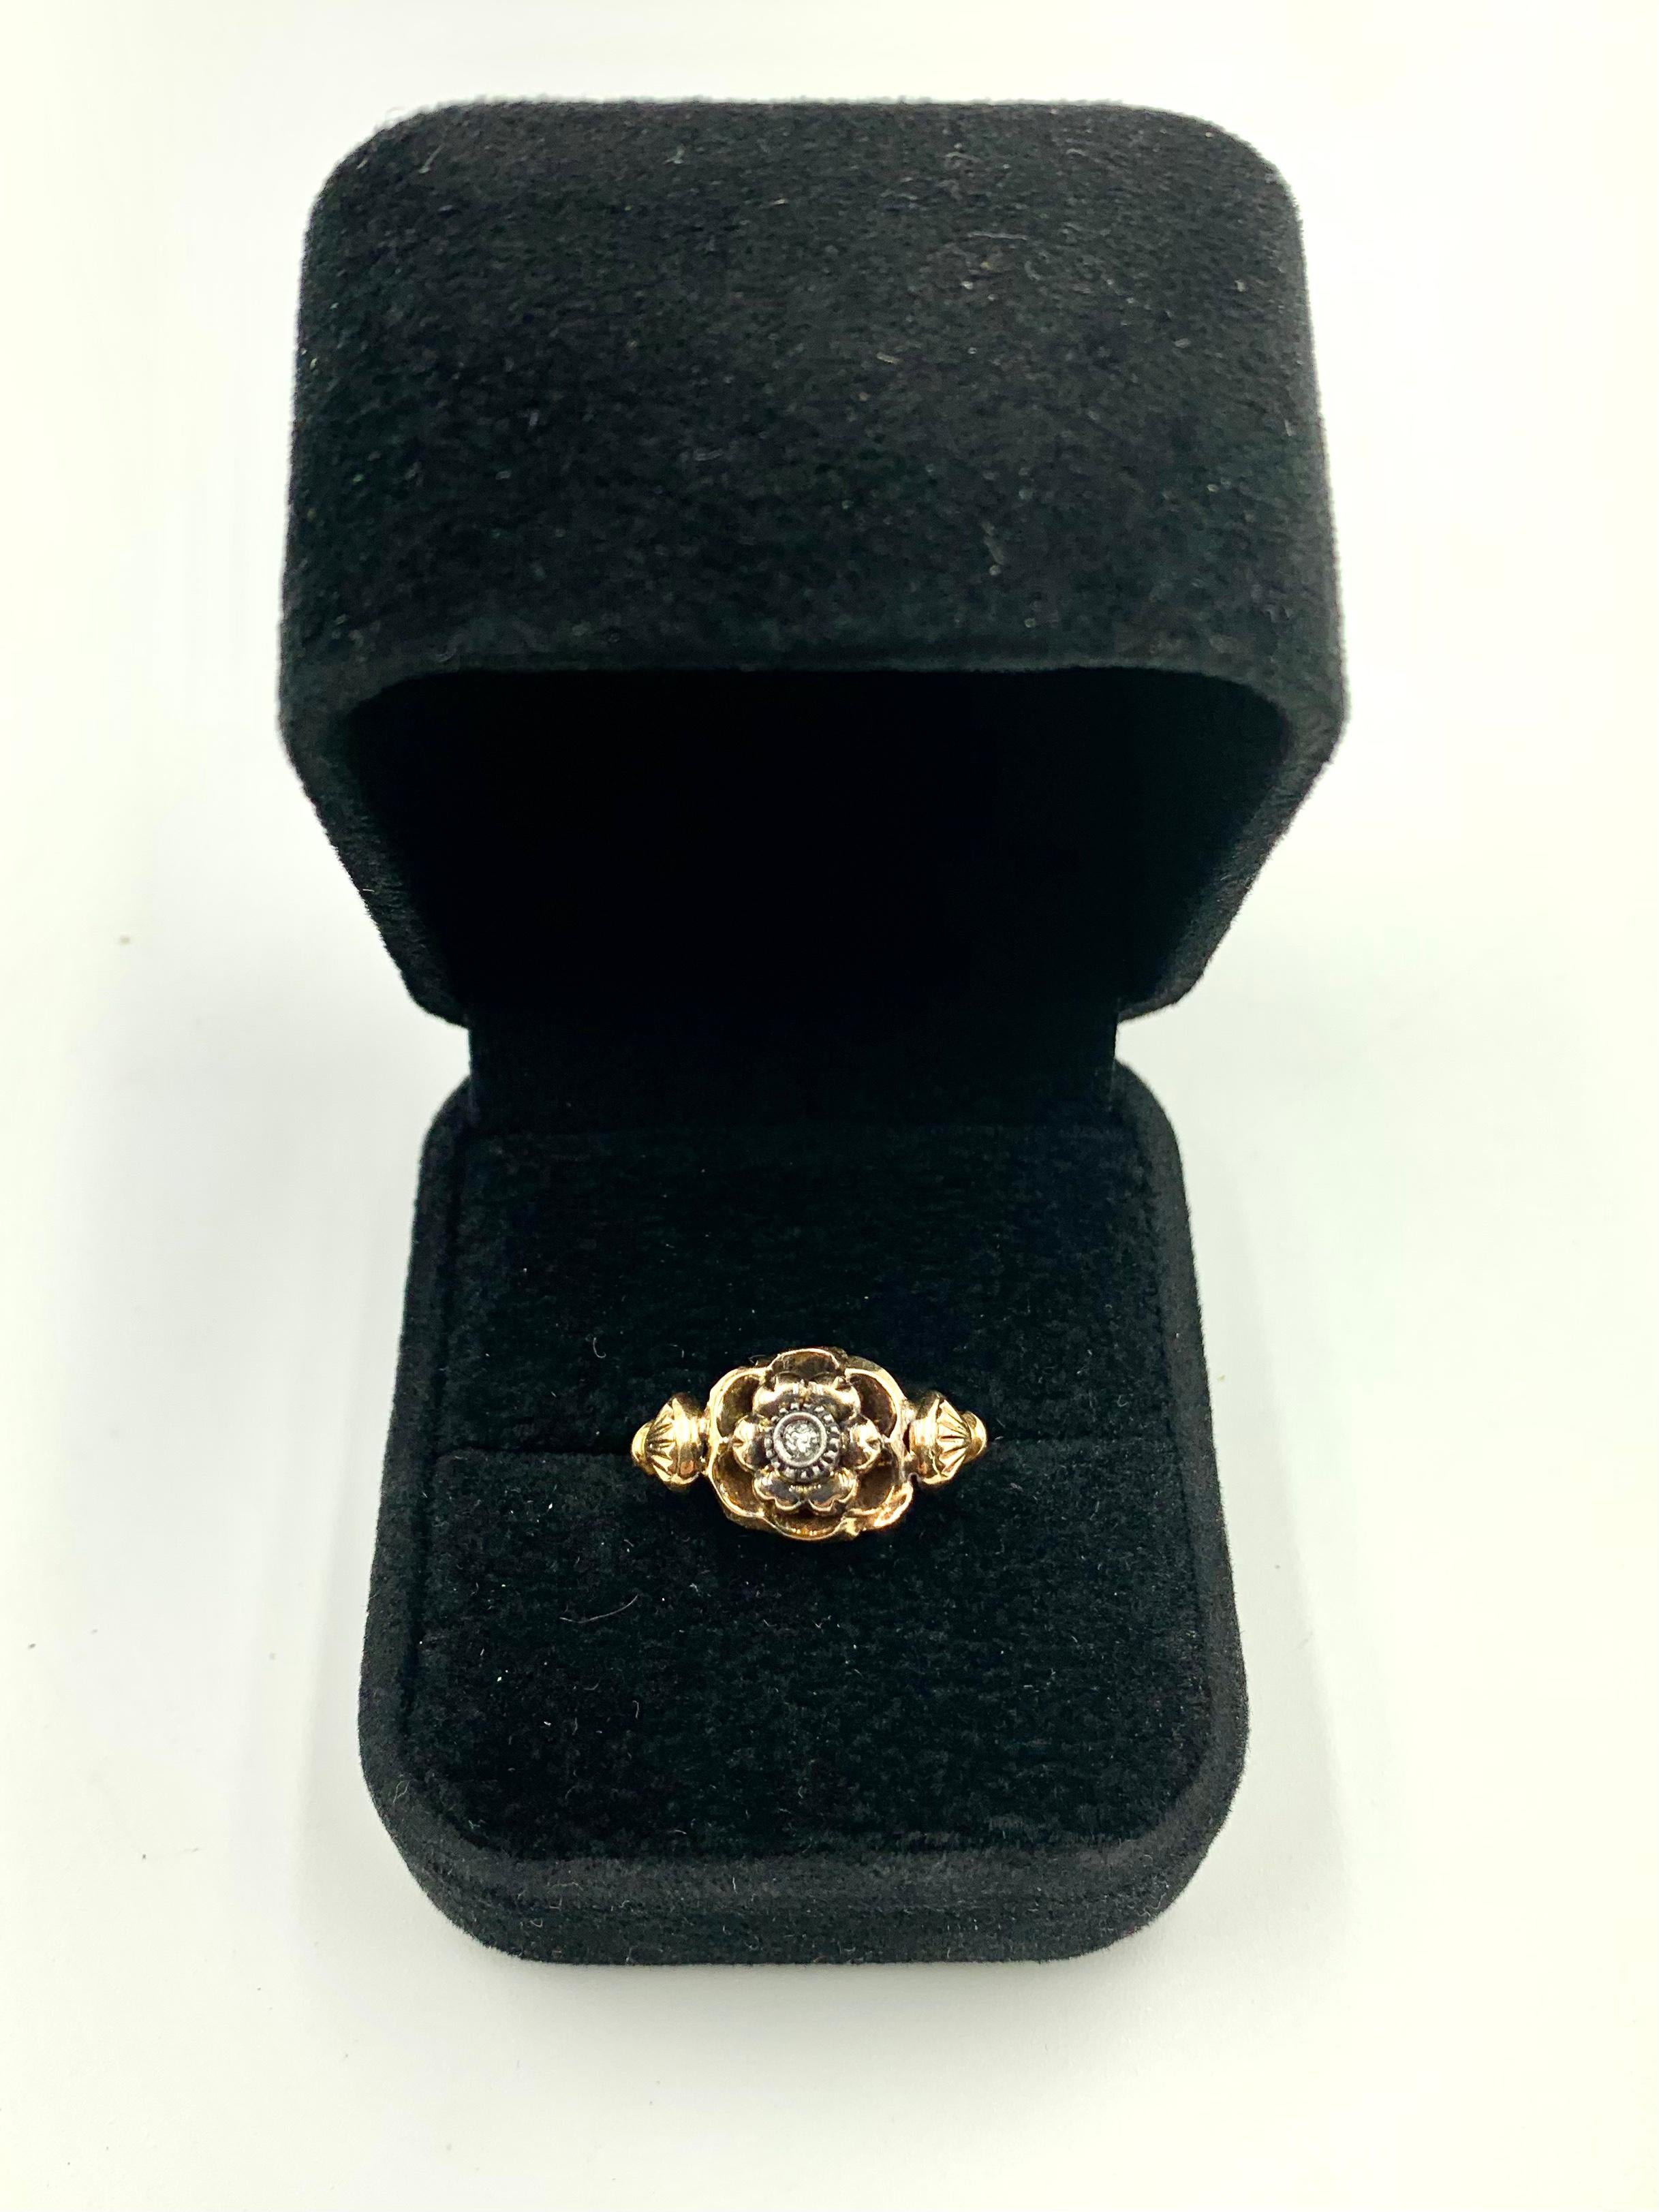 Fine antique Georgian period Rose Ring, the central mount n the shape of a rose in full bloom with a rough cut diamond center, flanked by unusual sea scallop shaped design elements.
Roses symbolize love, romance and beauty. The sea scallop is